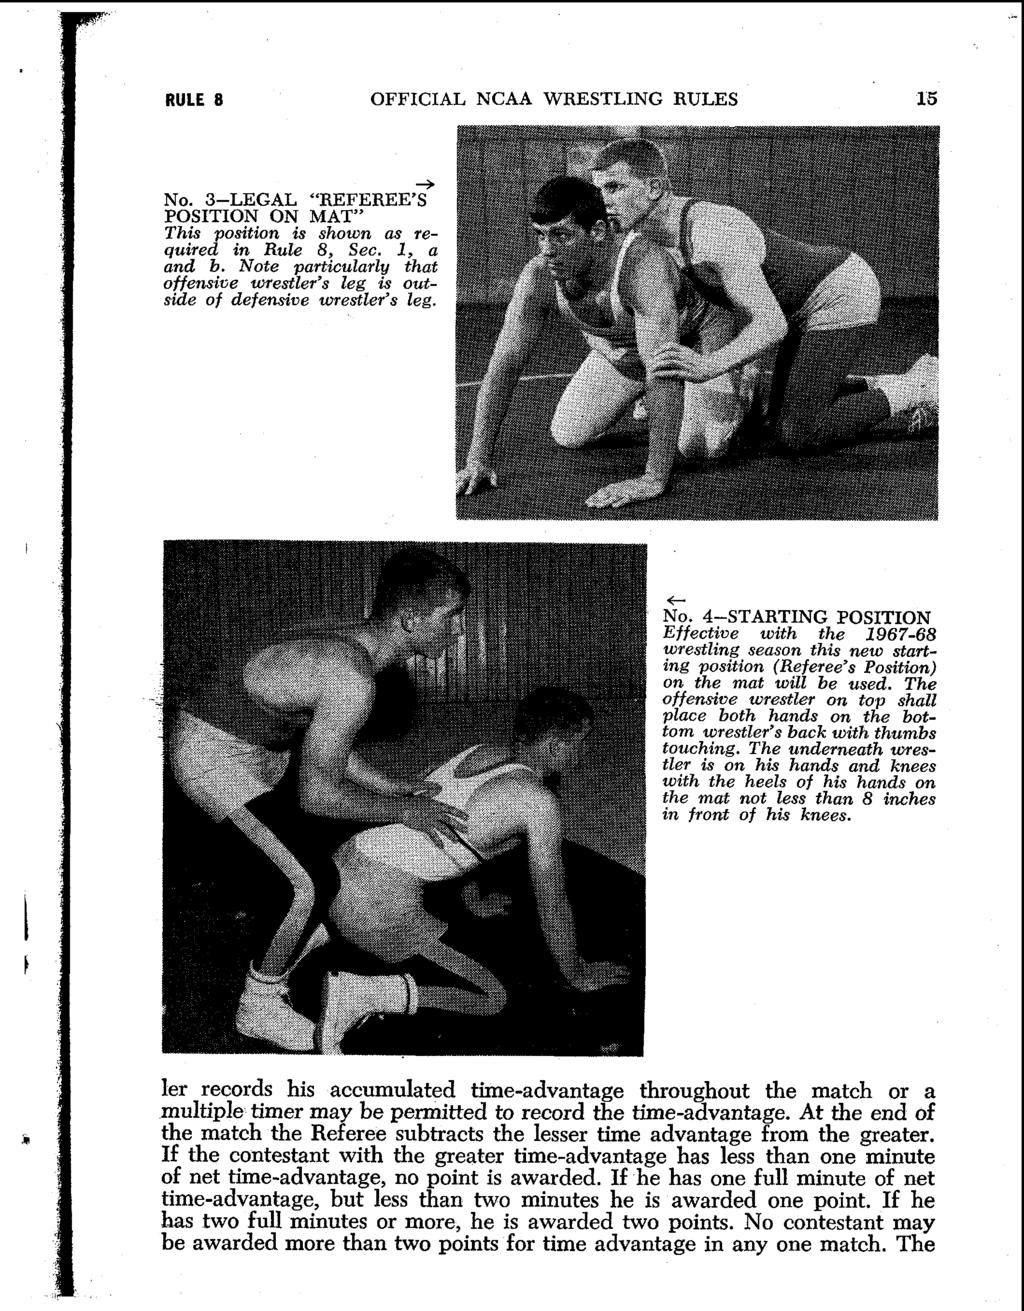 RULE 8 OFFICIAL NCAA WRESTLING RULES 15 No. 3-LEGAL "REFEREE'S' POSITION ON MAT" This ~osition is shown as required in Rule 8, Sec. 1, a and b.